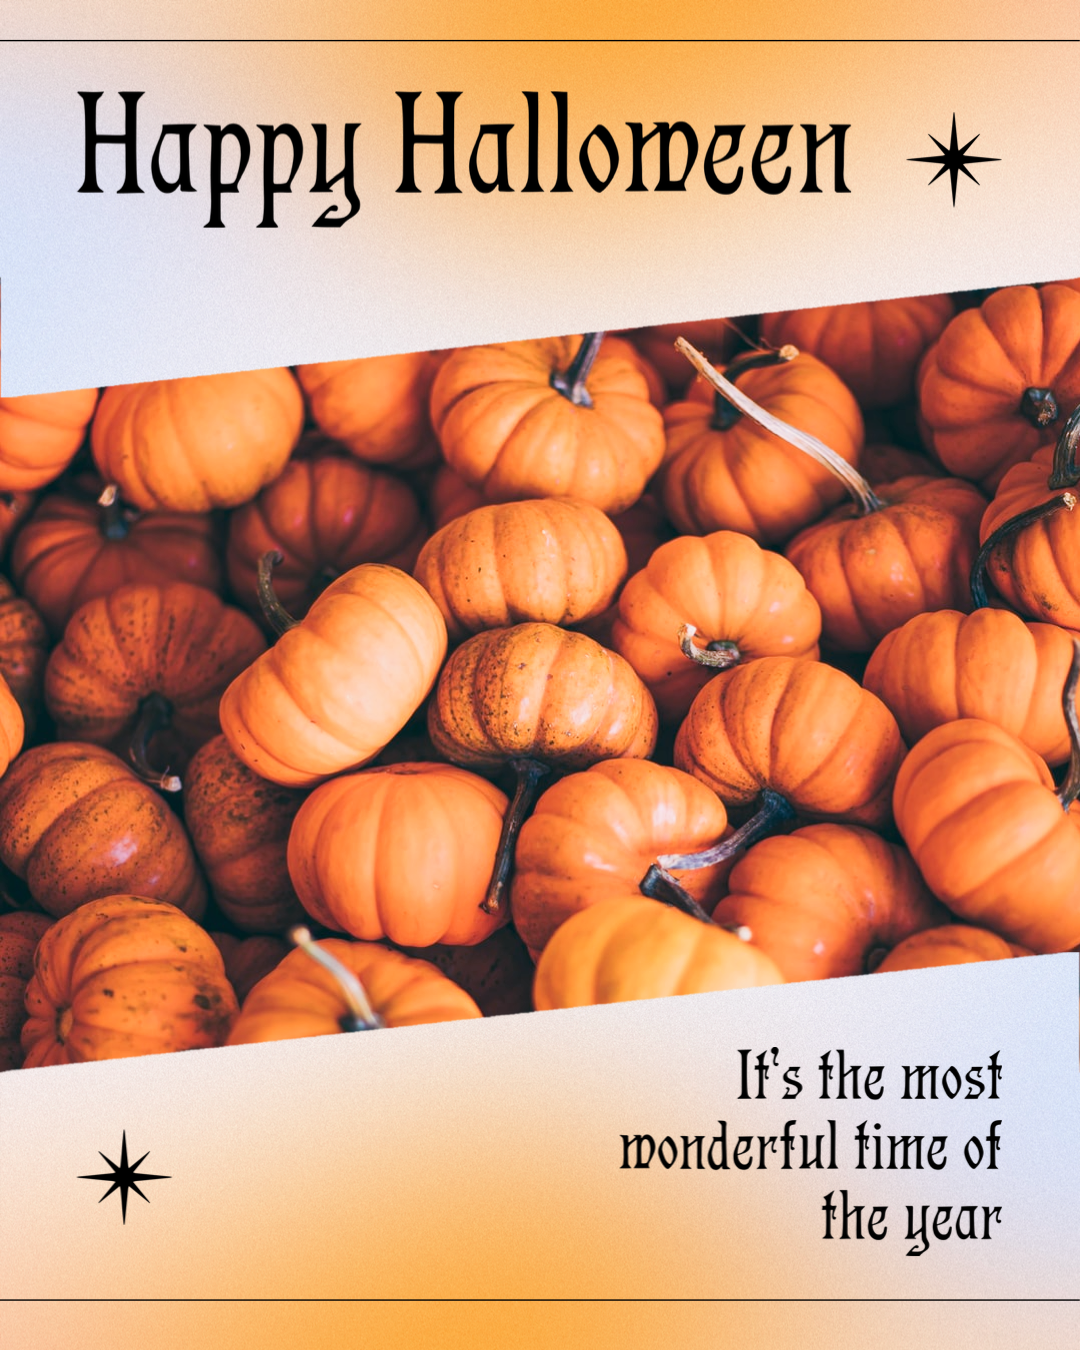 A Picture Of A Pile Of Pumpkins With A Happy Halloween Message Halloween Template